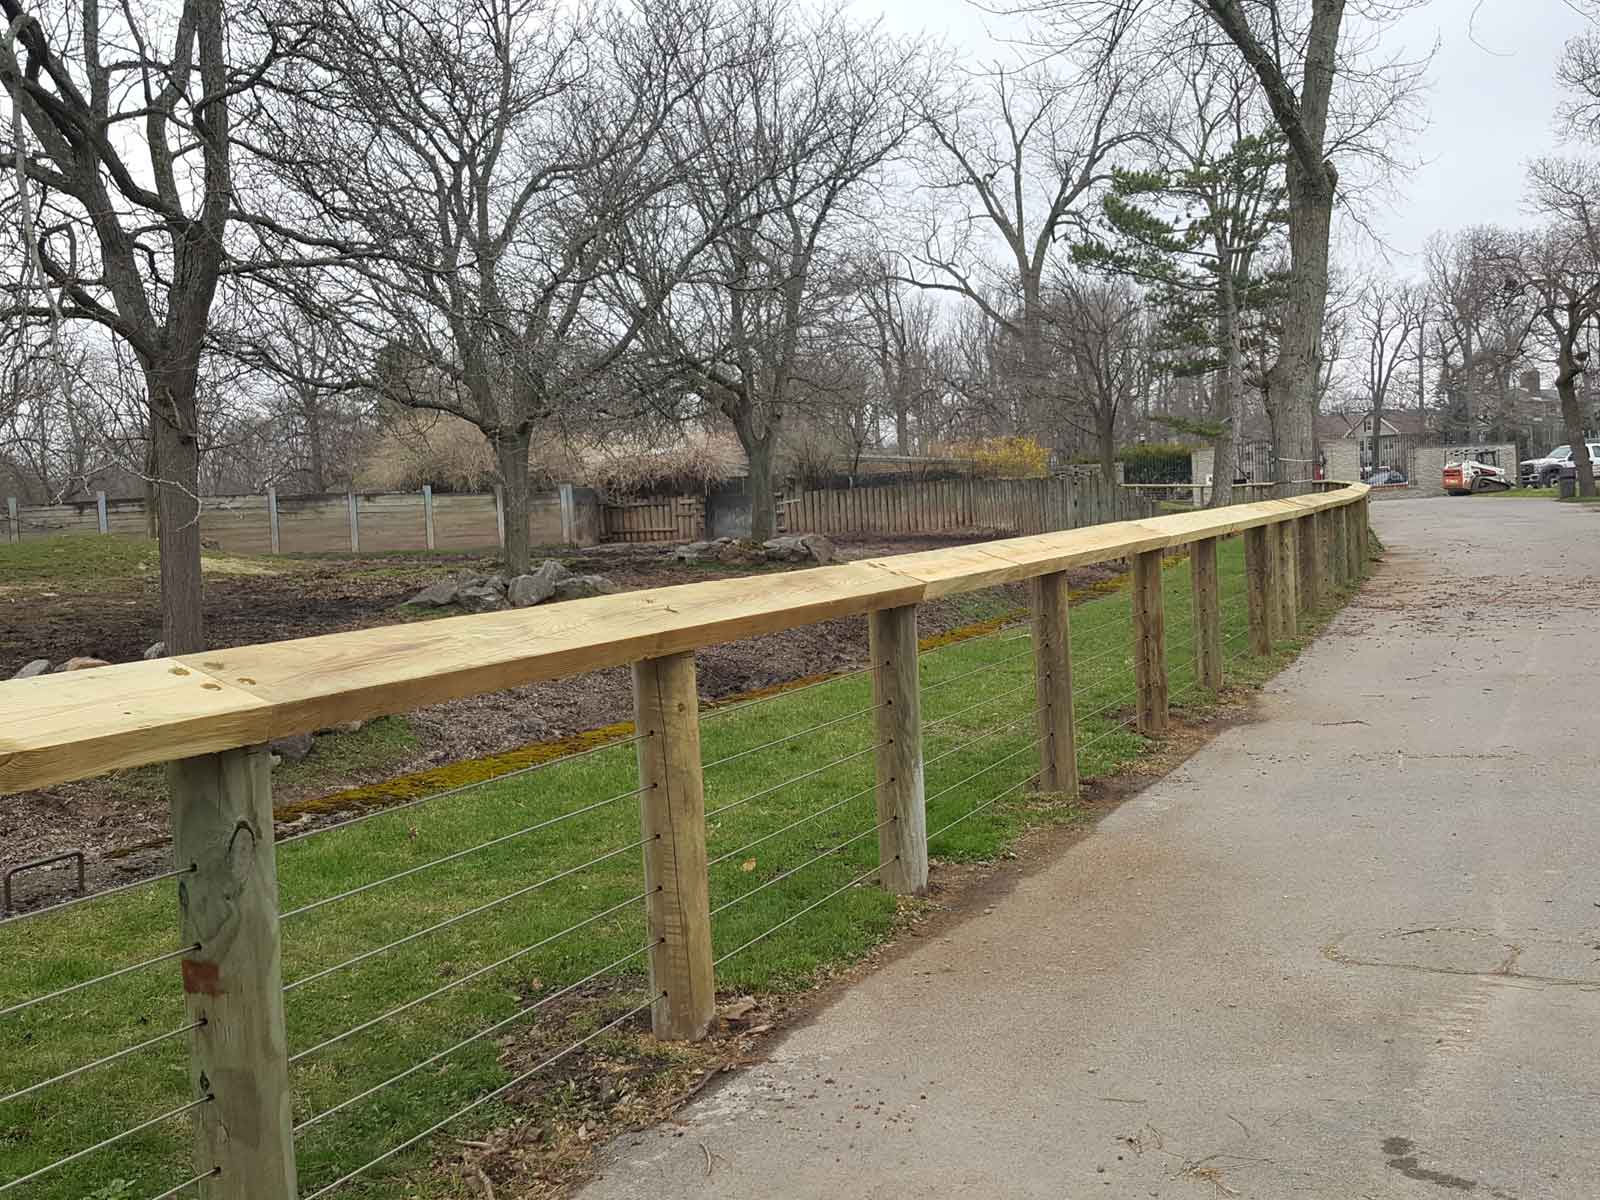 Commercial Fencing for Zoos and Animal Parks in Buffalo, NY